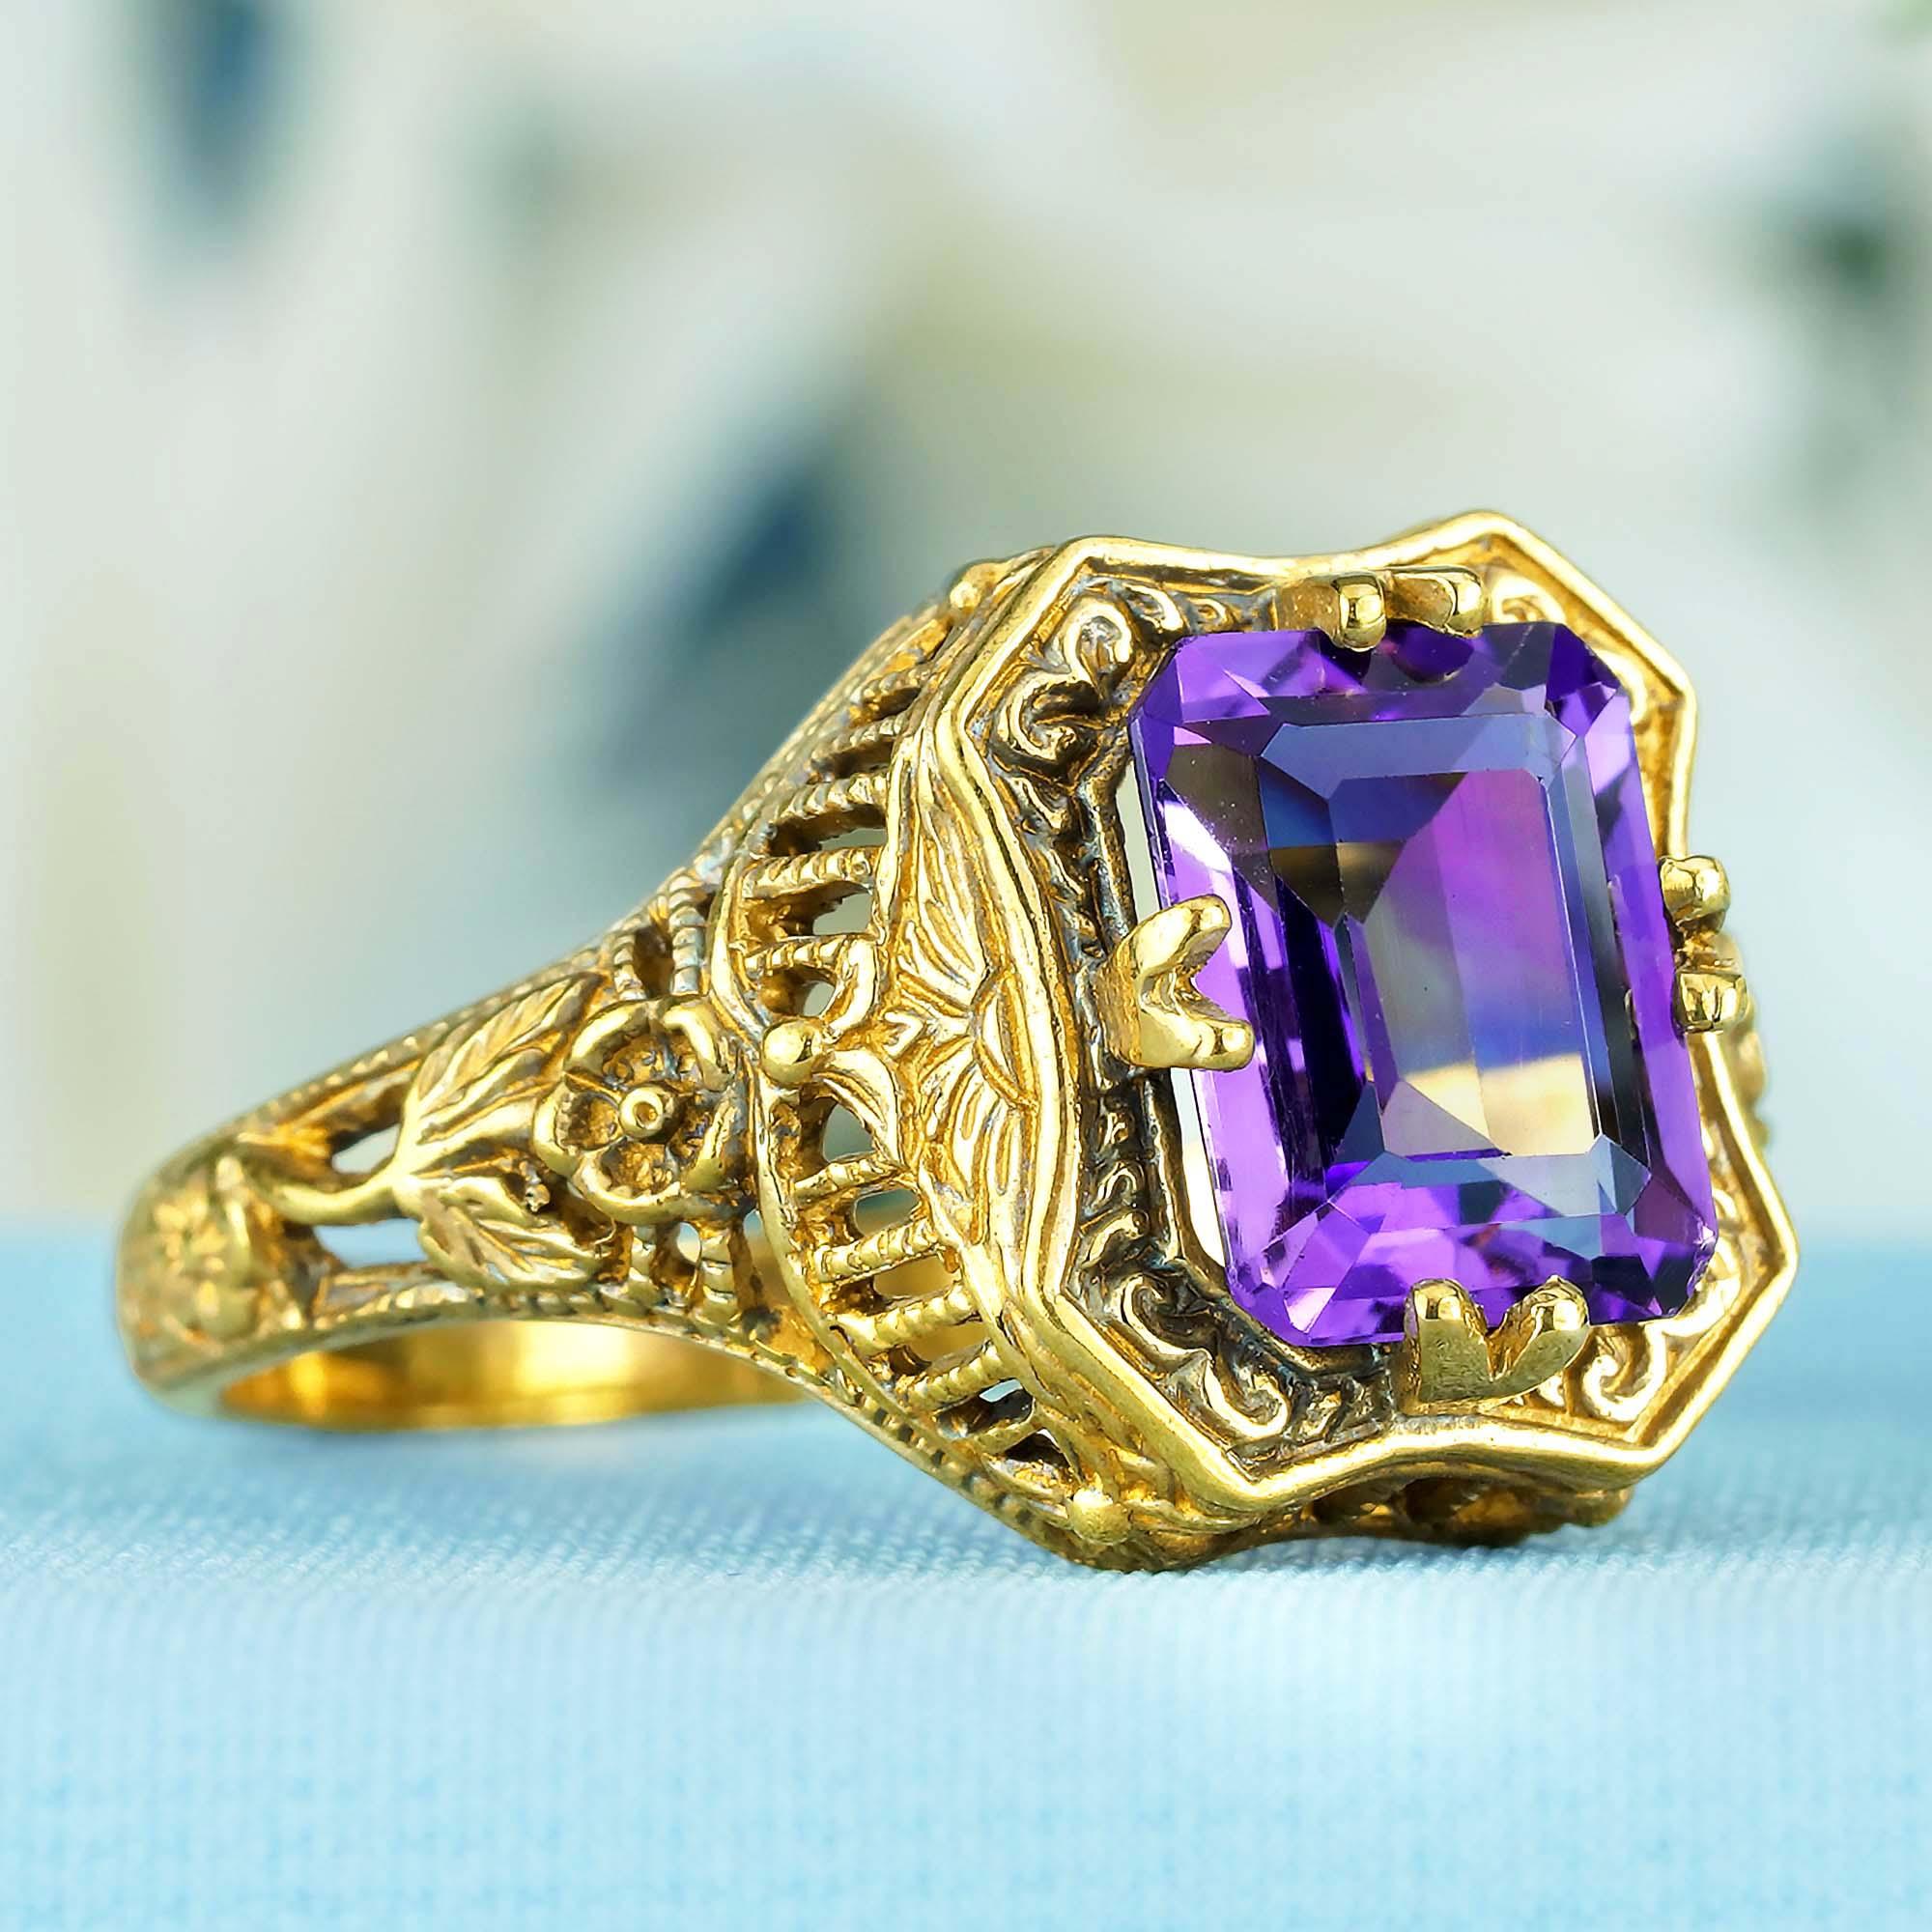 For Sale:  Natural Emerald Cut Amethyst Vintage Style Filigree Ring in Solid 9K Yellow Gold 2